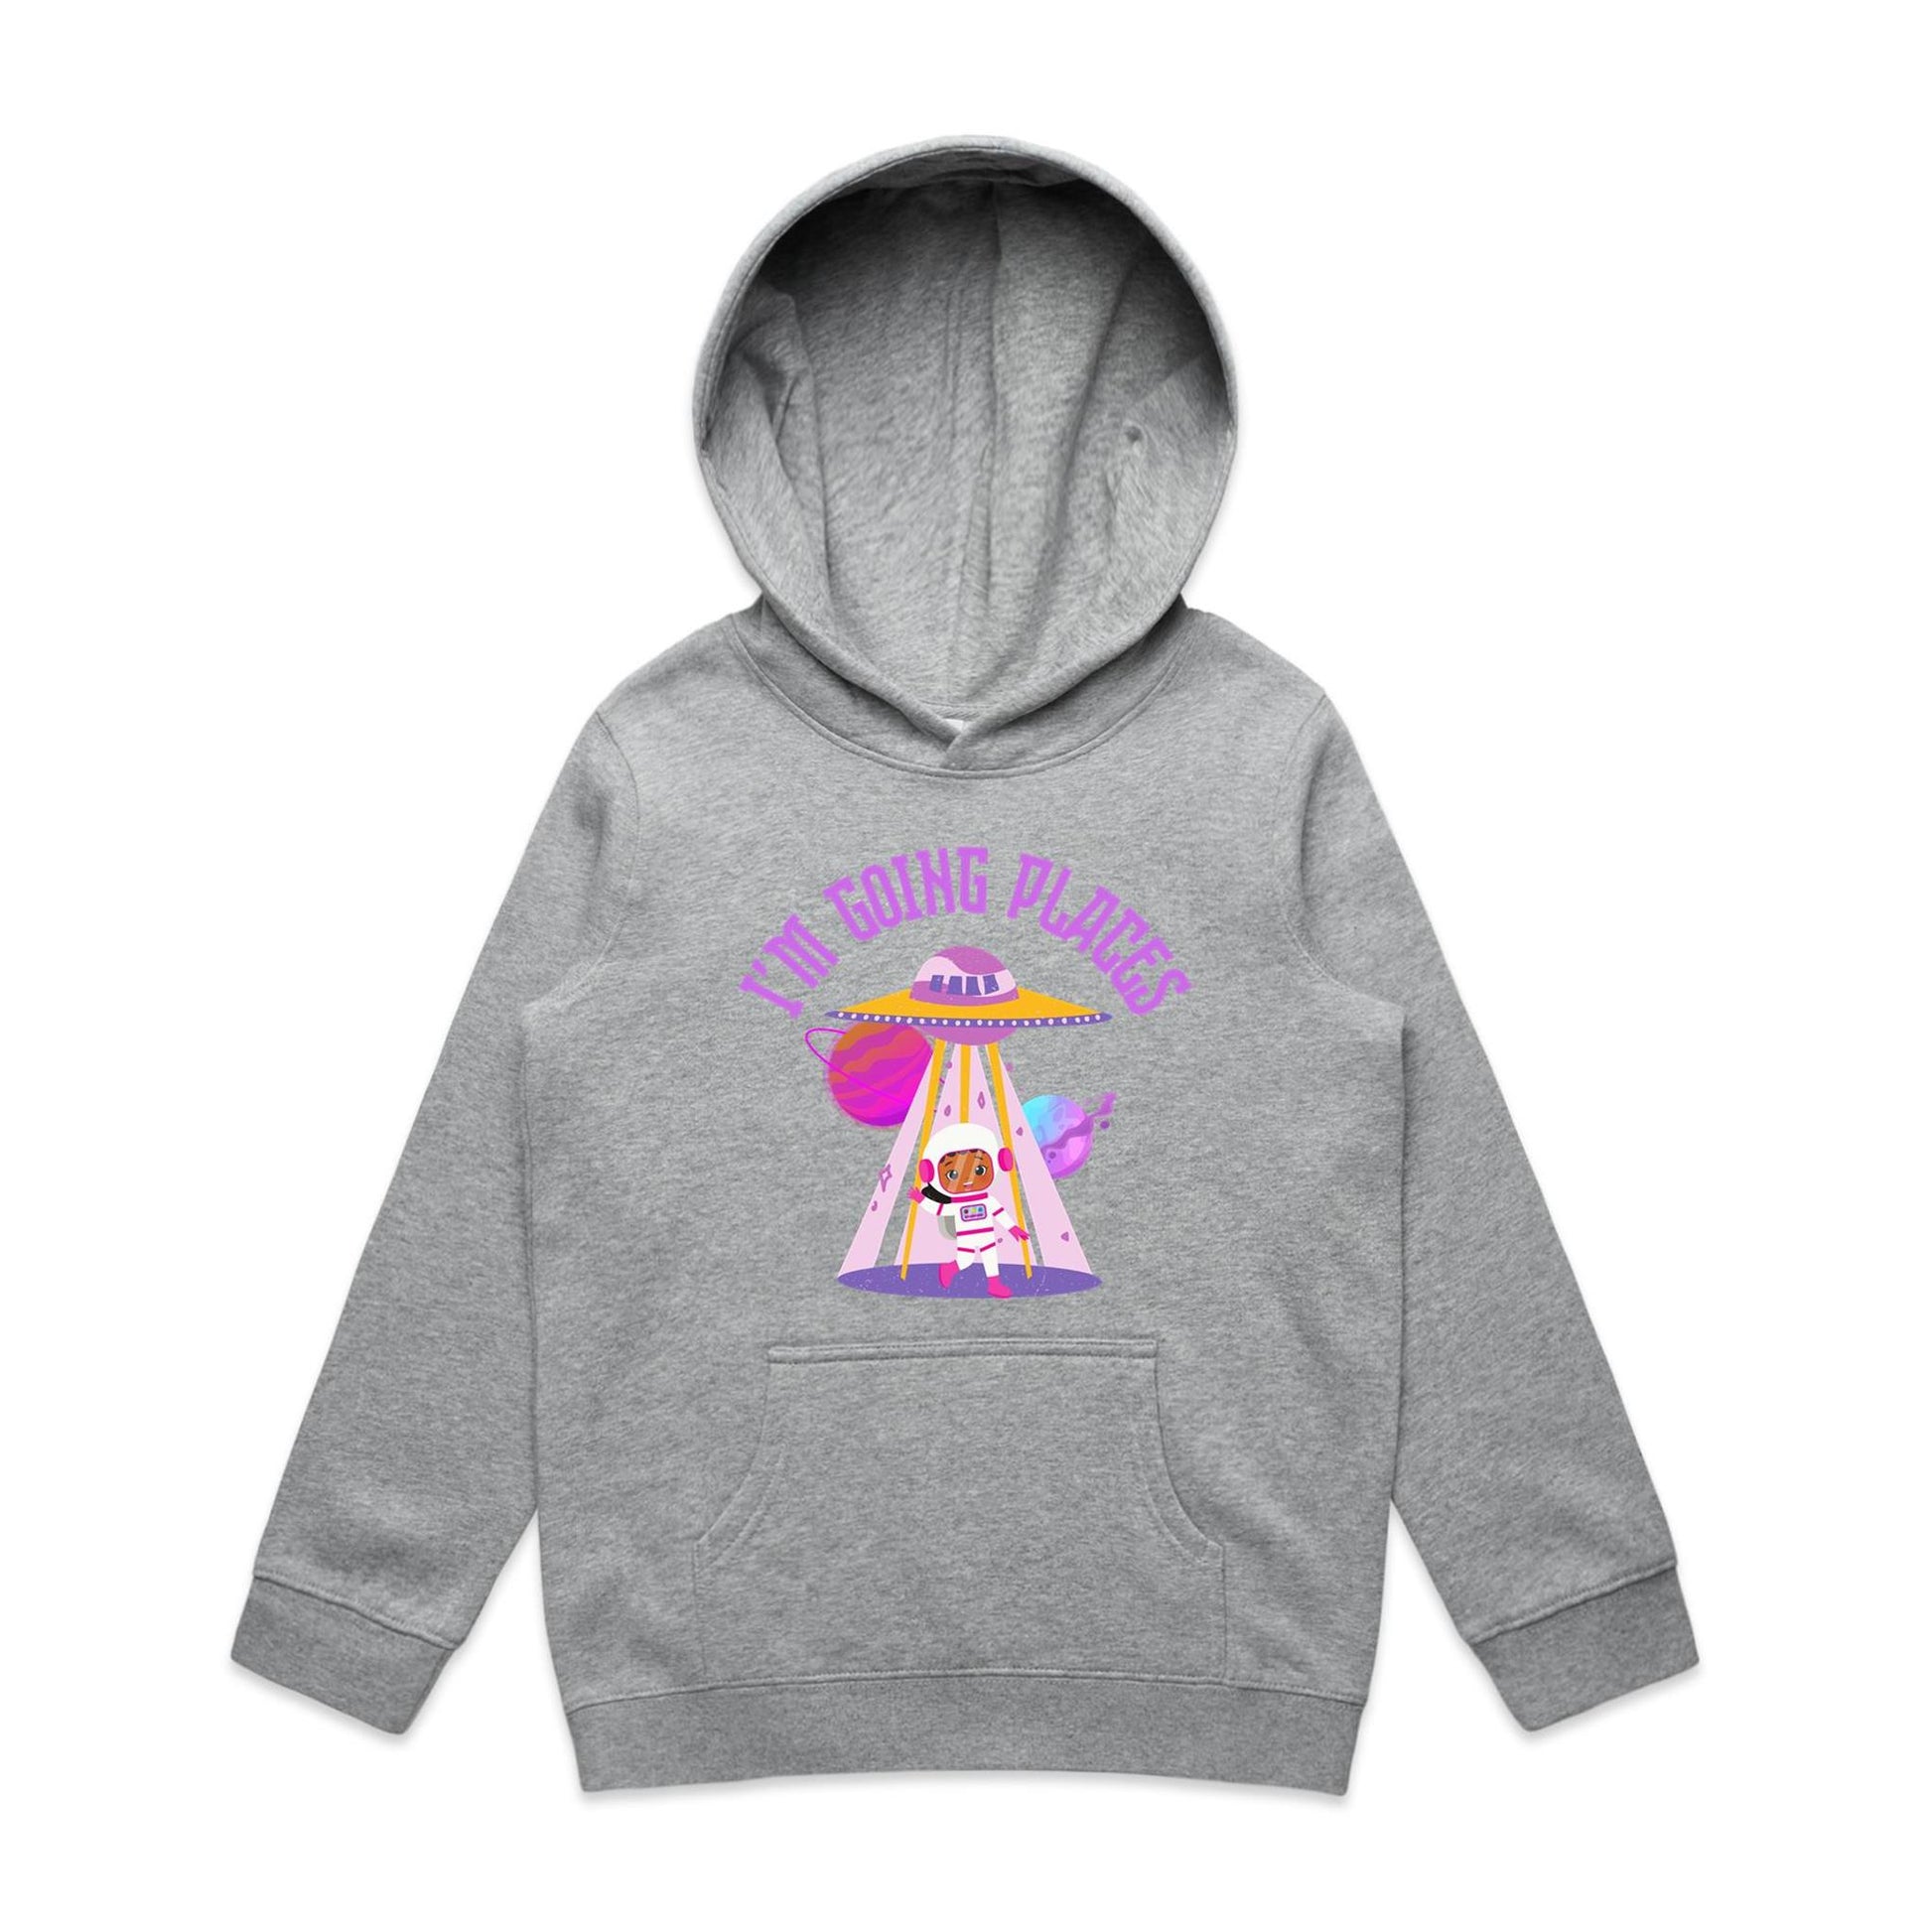 UFO, I'm Going Places - Youth Supply Hood Grey Marle Kids Hoodie Sci Fi